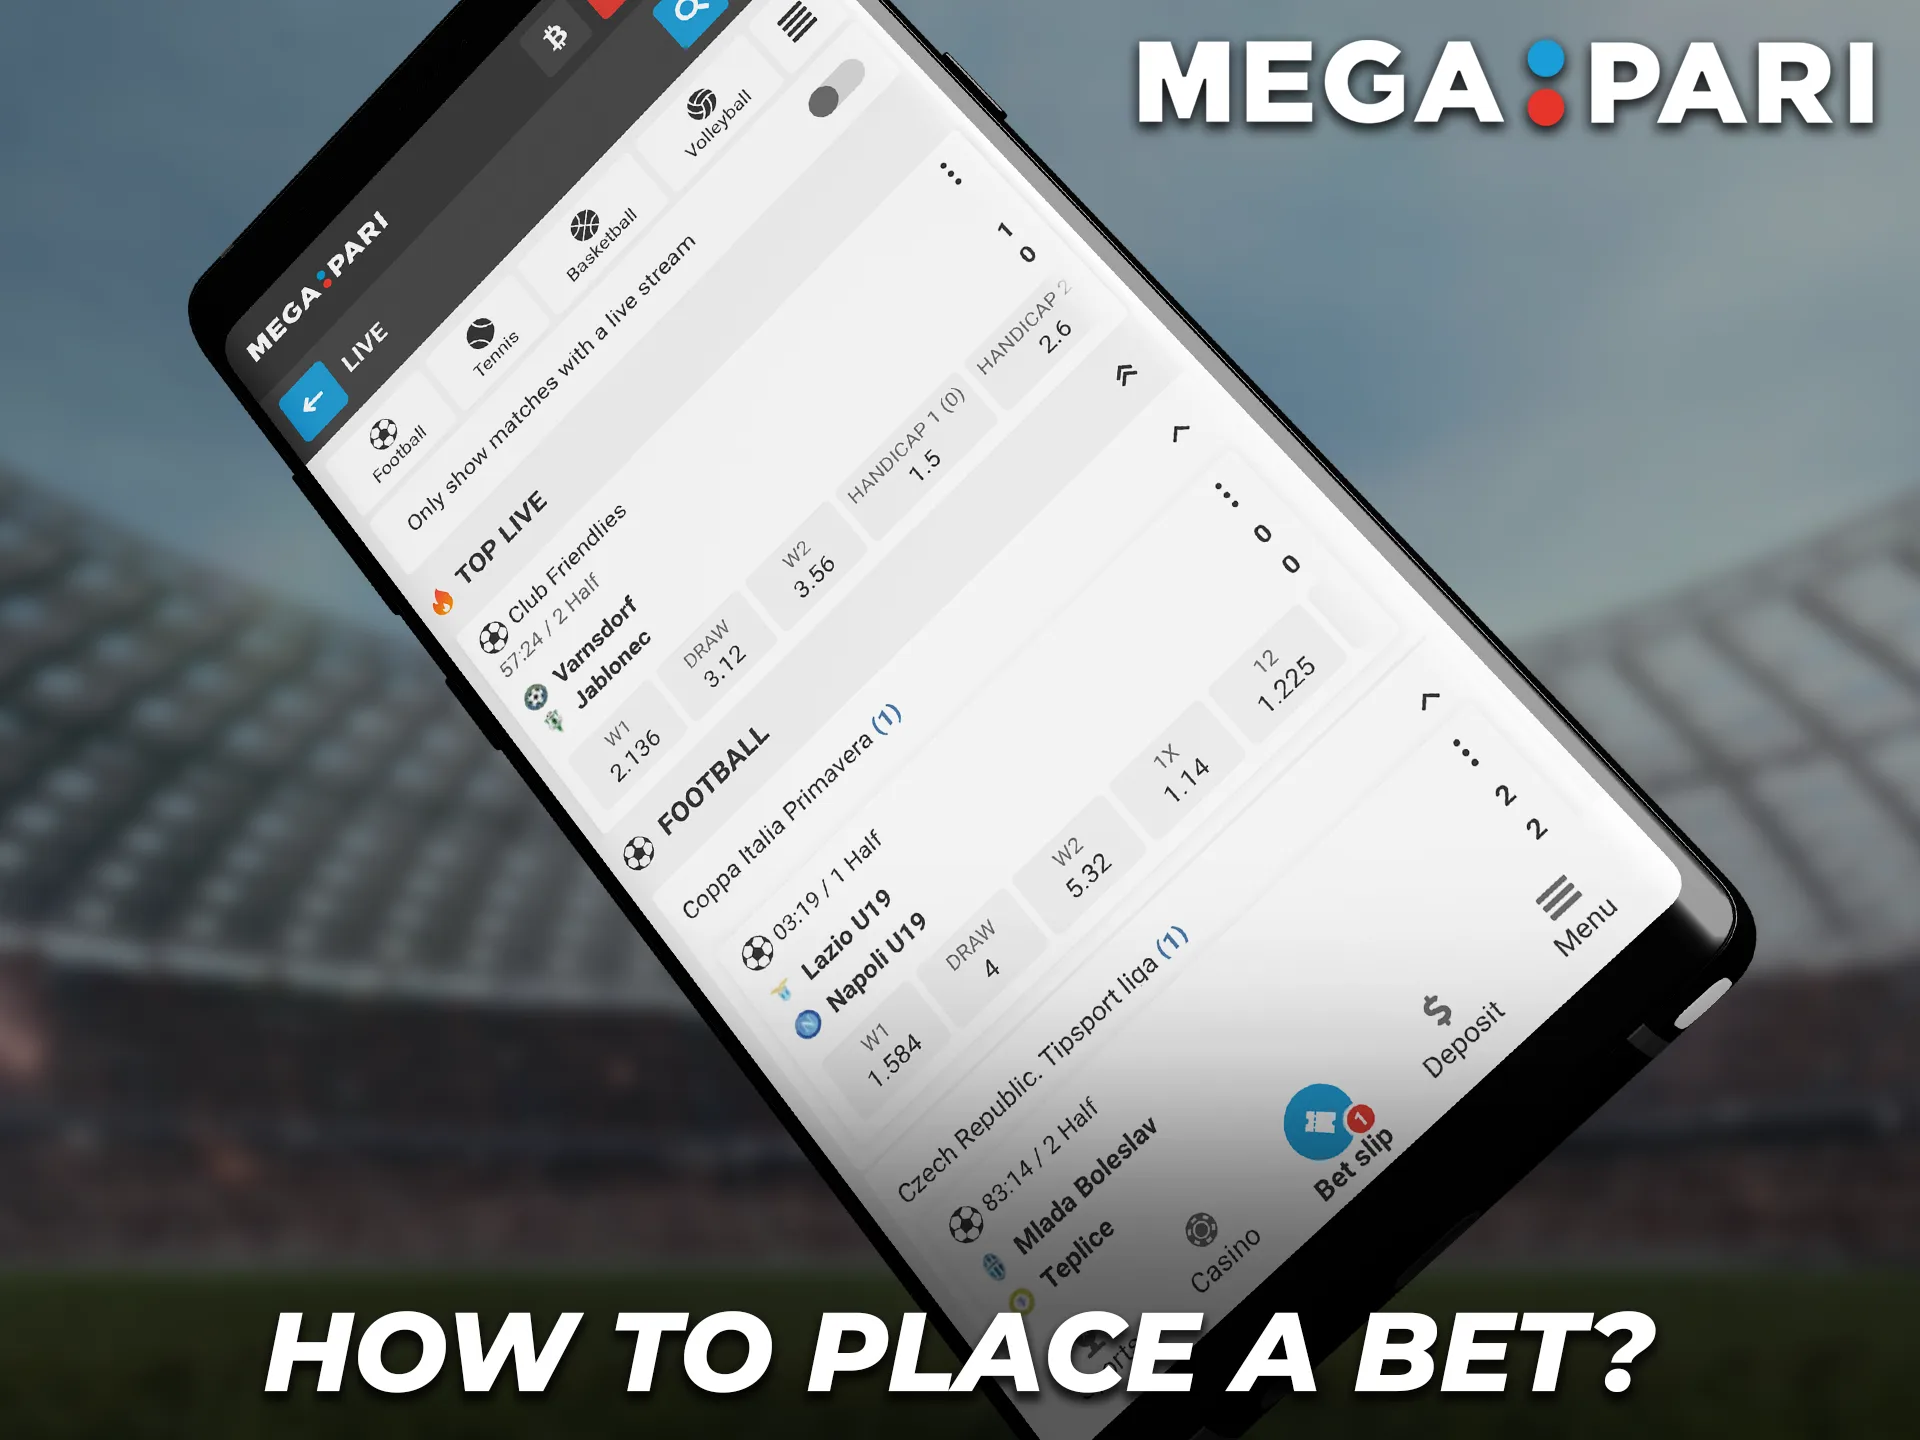 To place bets make a deposit, select a sports category and odds.